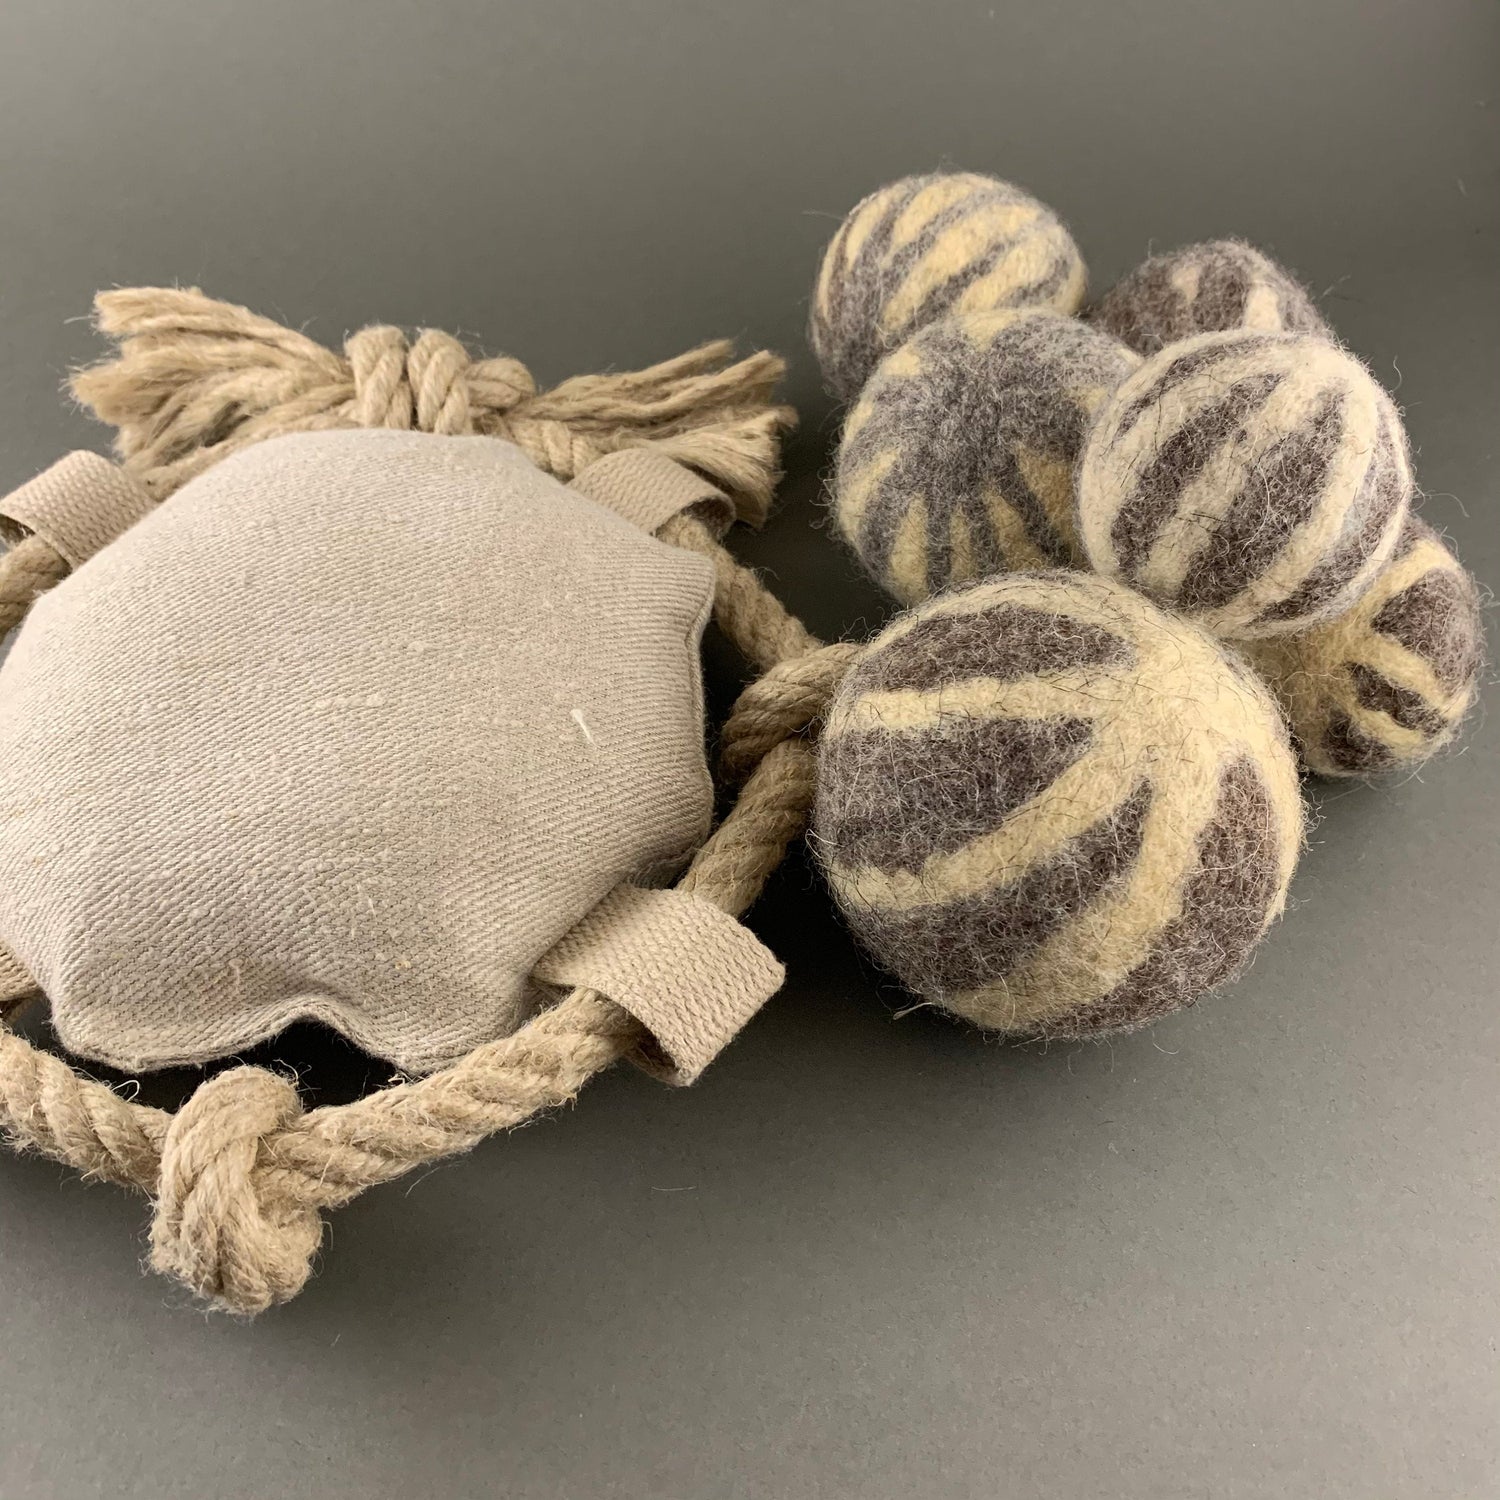 dog toys made from natural materials